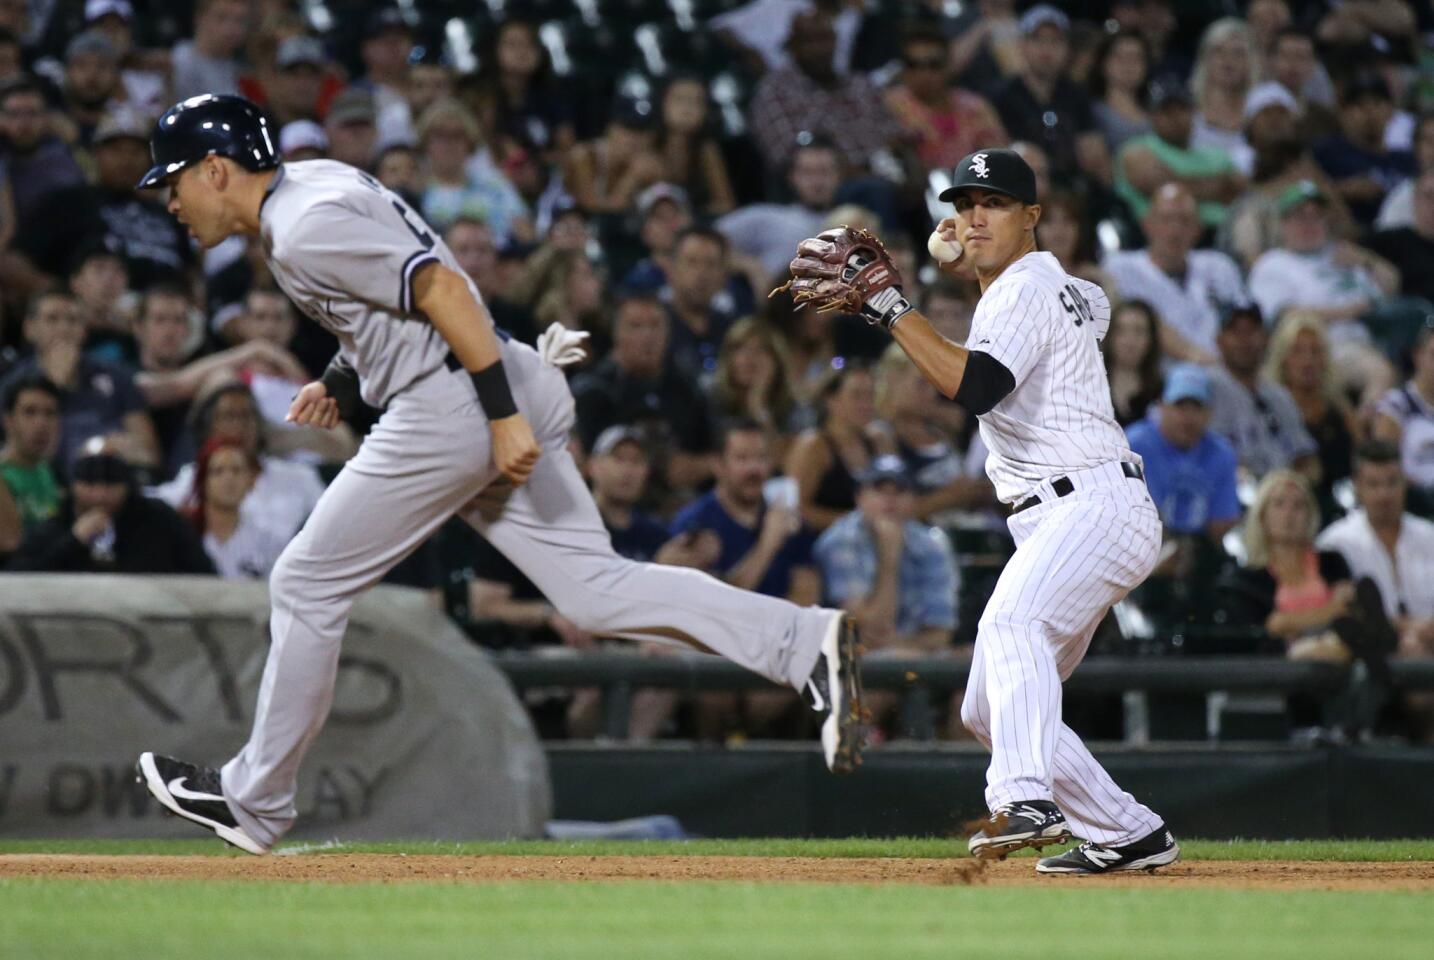 White Sox third baseman Tyler Saladino, right, winds up for the throw to first base as New York Yankees center fielder Jacoby Ellsbury heads for third base in the sixth inning.